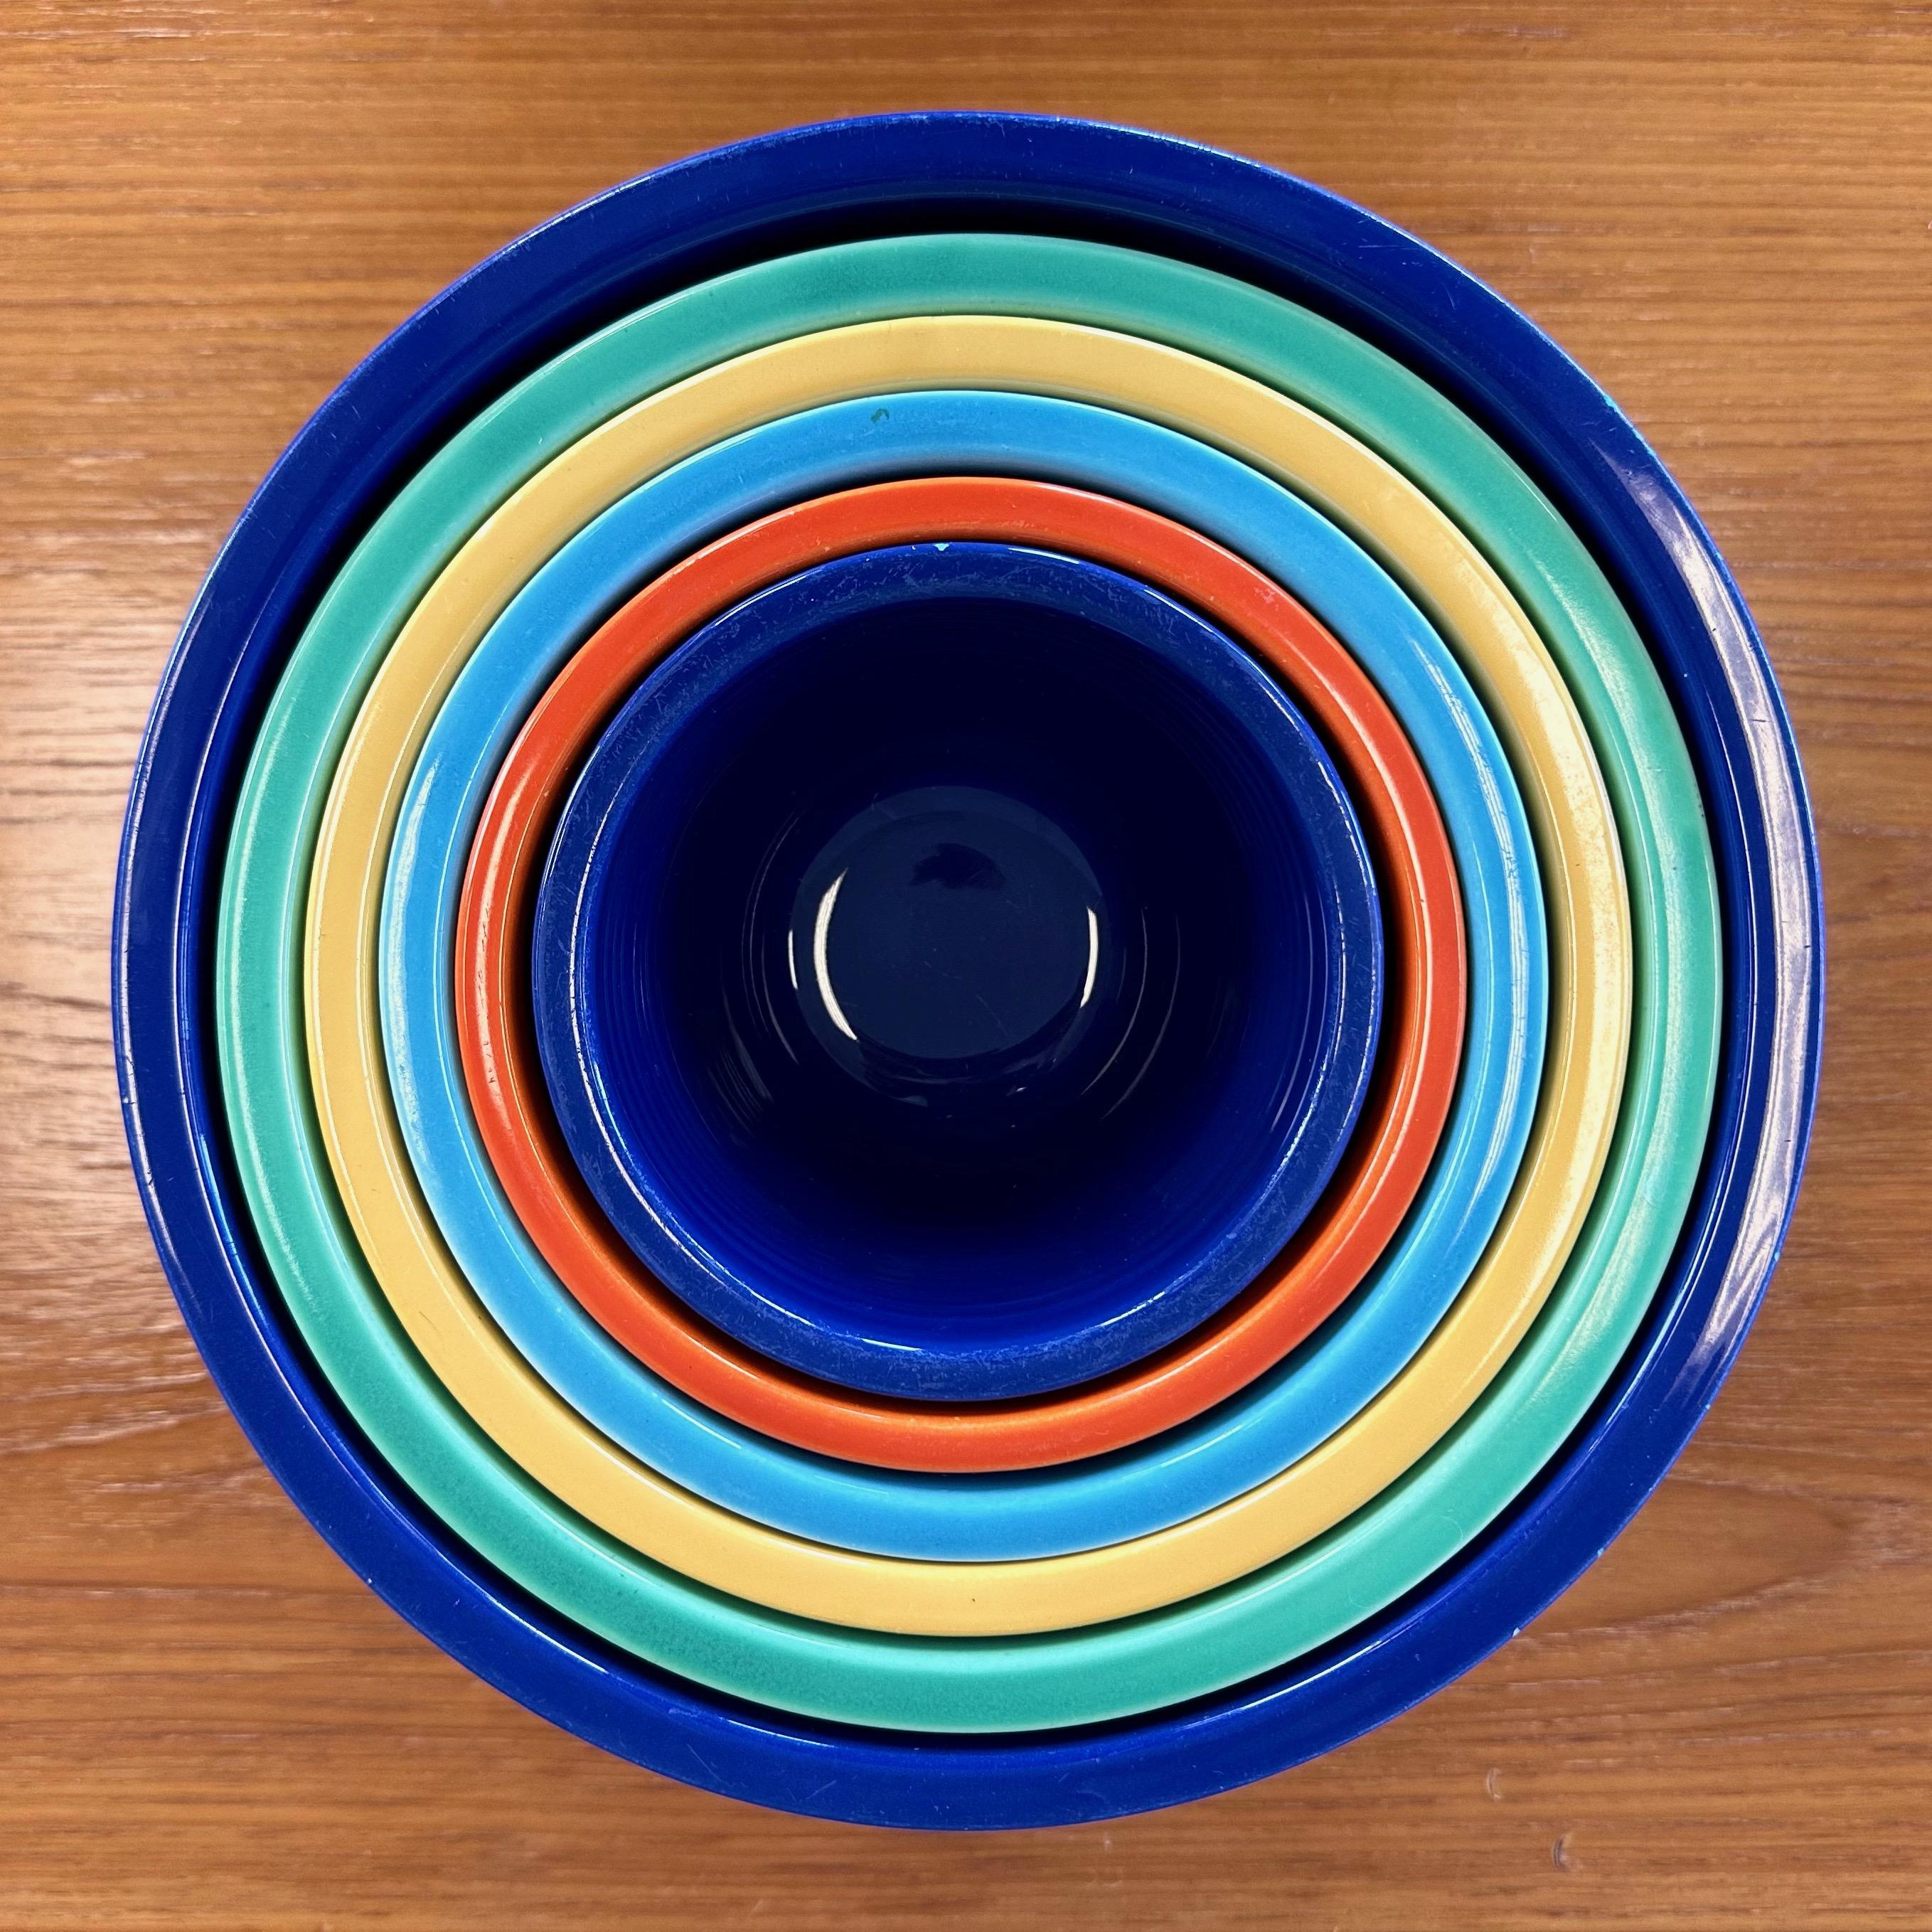 Early Vintage Fiestaware Nesting Mixing Bowls, Multi-Color Set of Six, c. 1940 For Sale 1